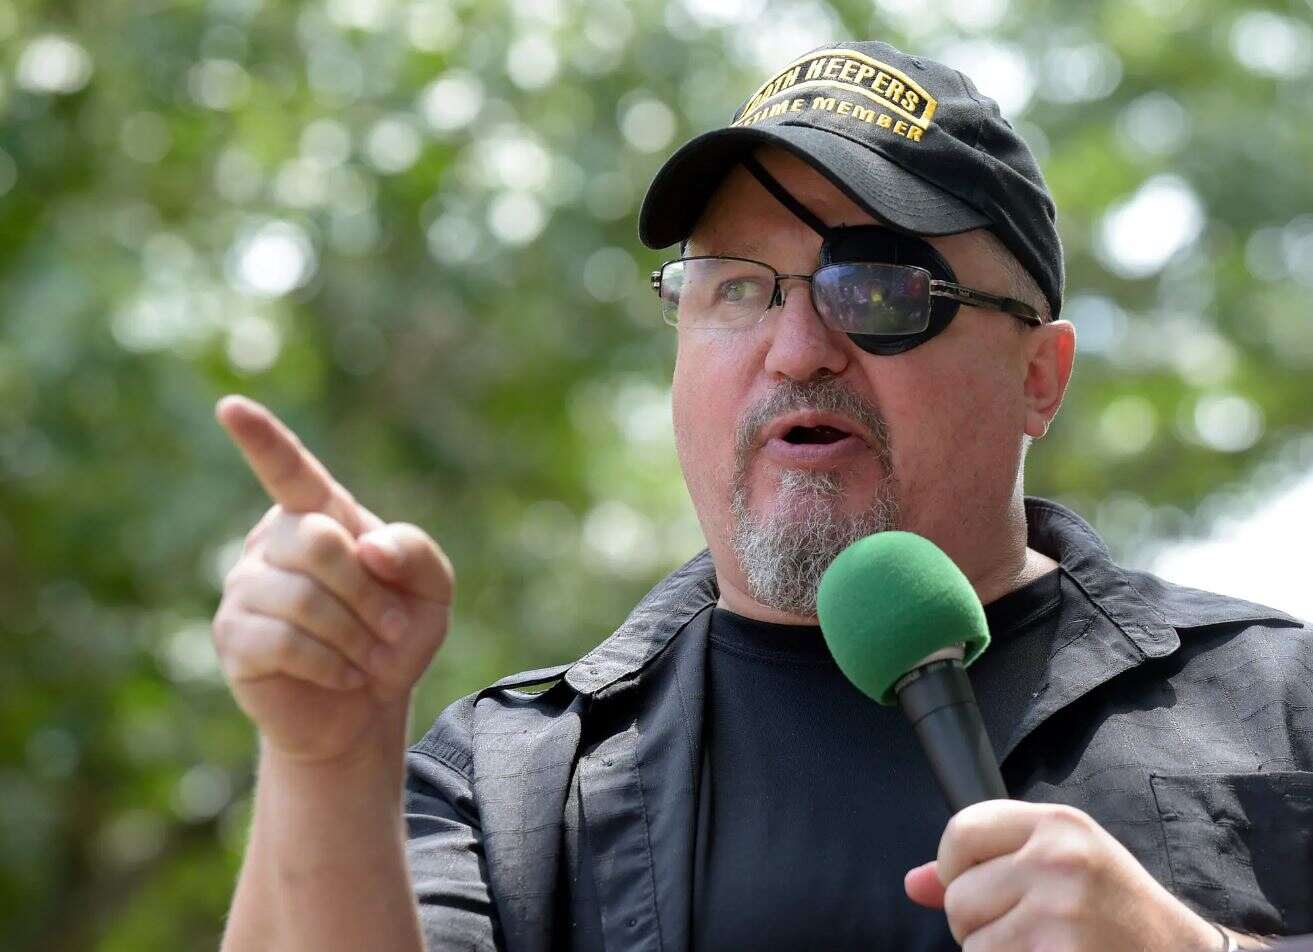 The sedition trial of the Oath Keepers is about to begin